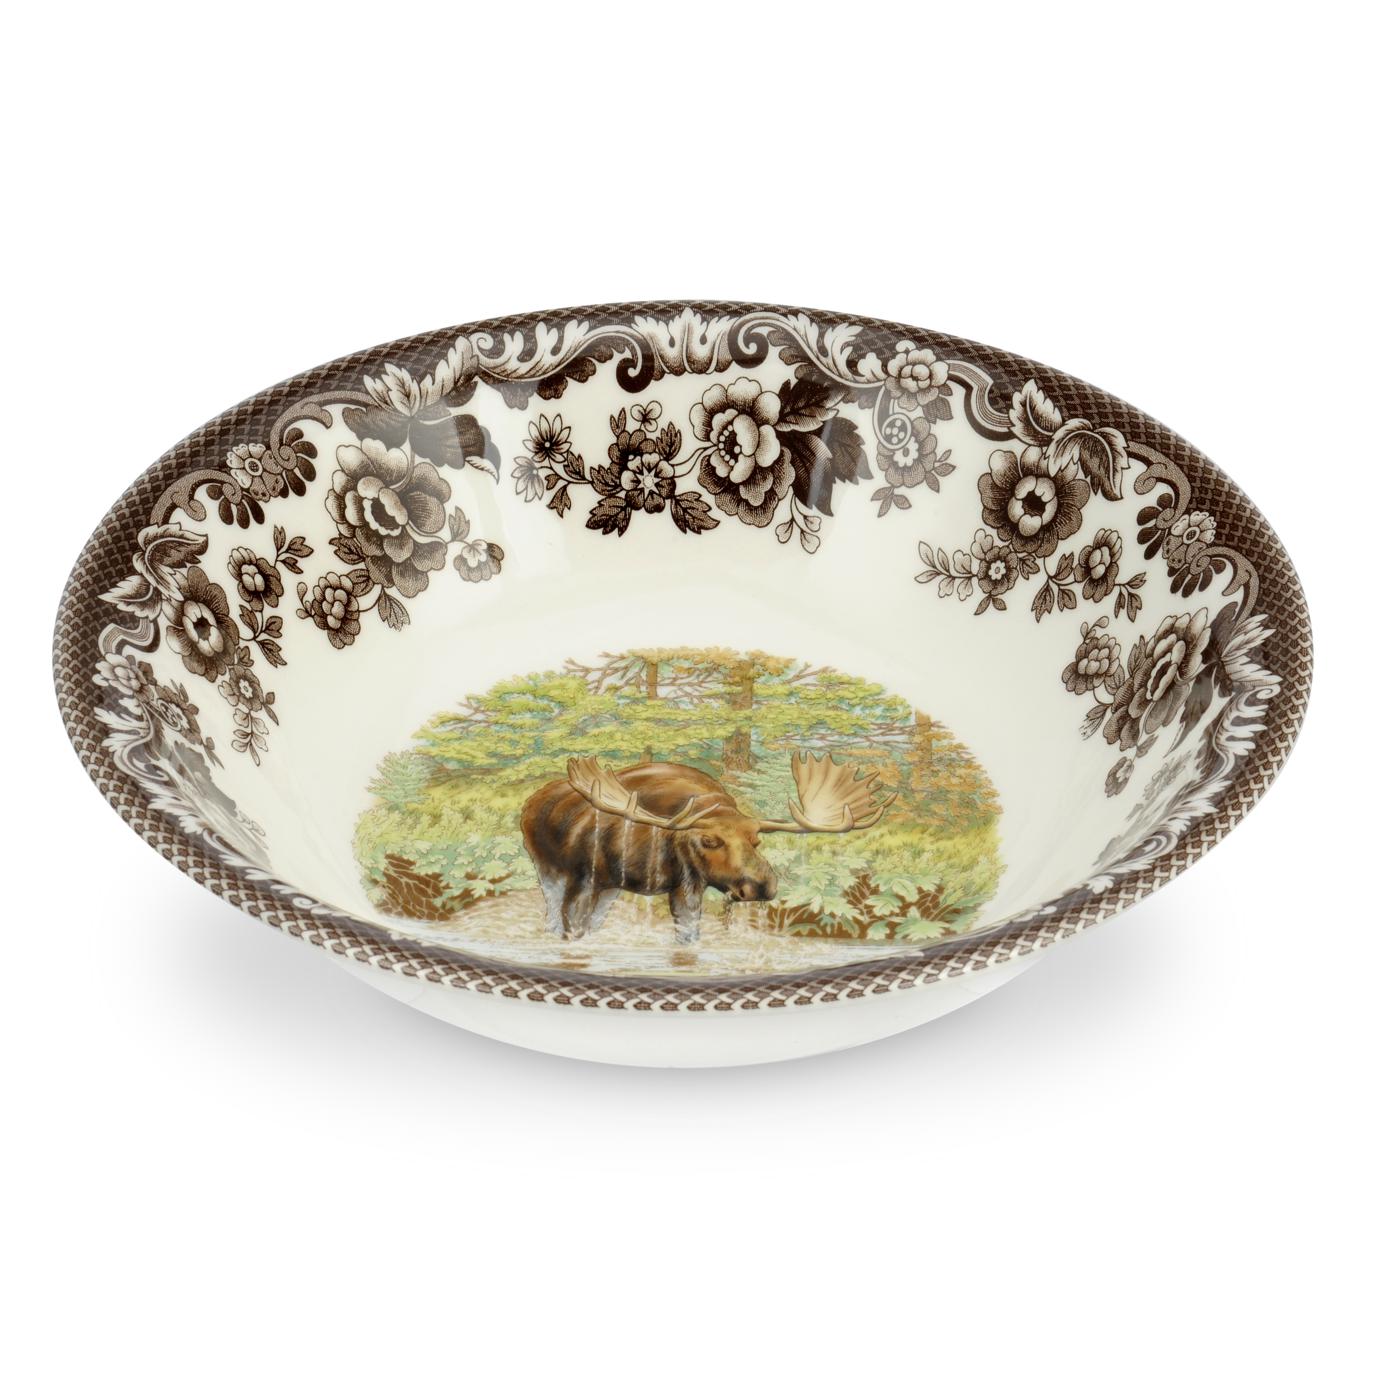 Spode Woodland Ascot Cereal Bowl, Majestic Moose